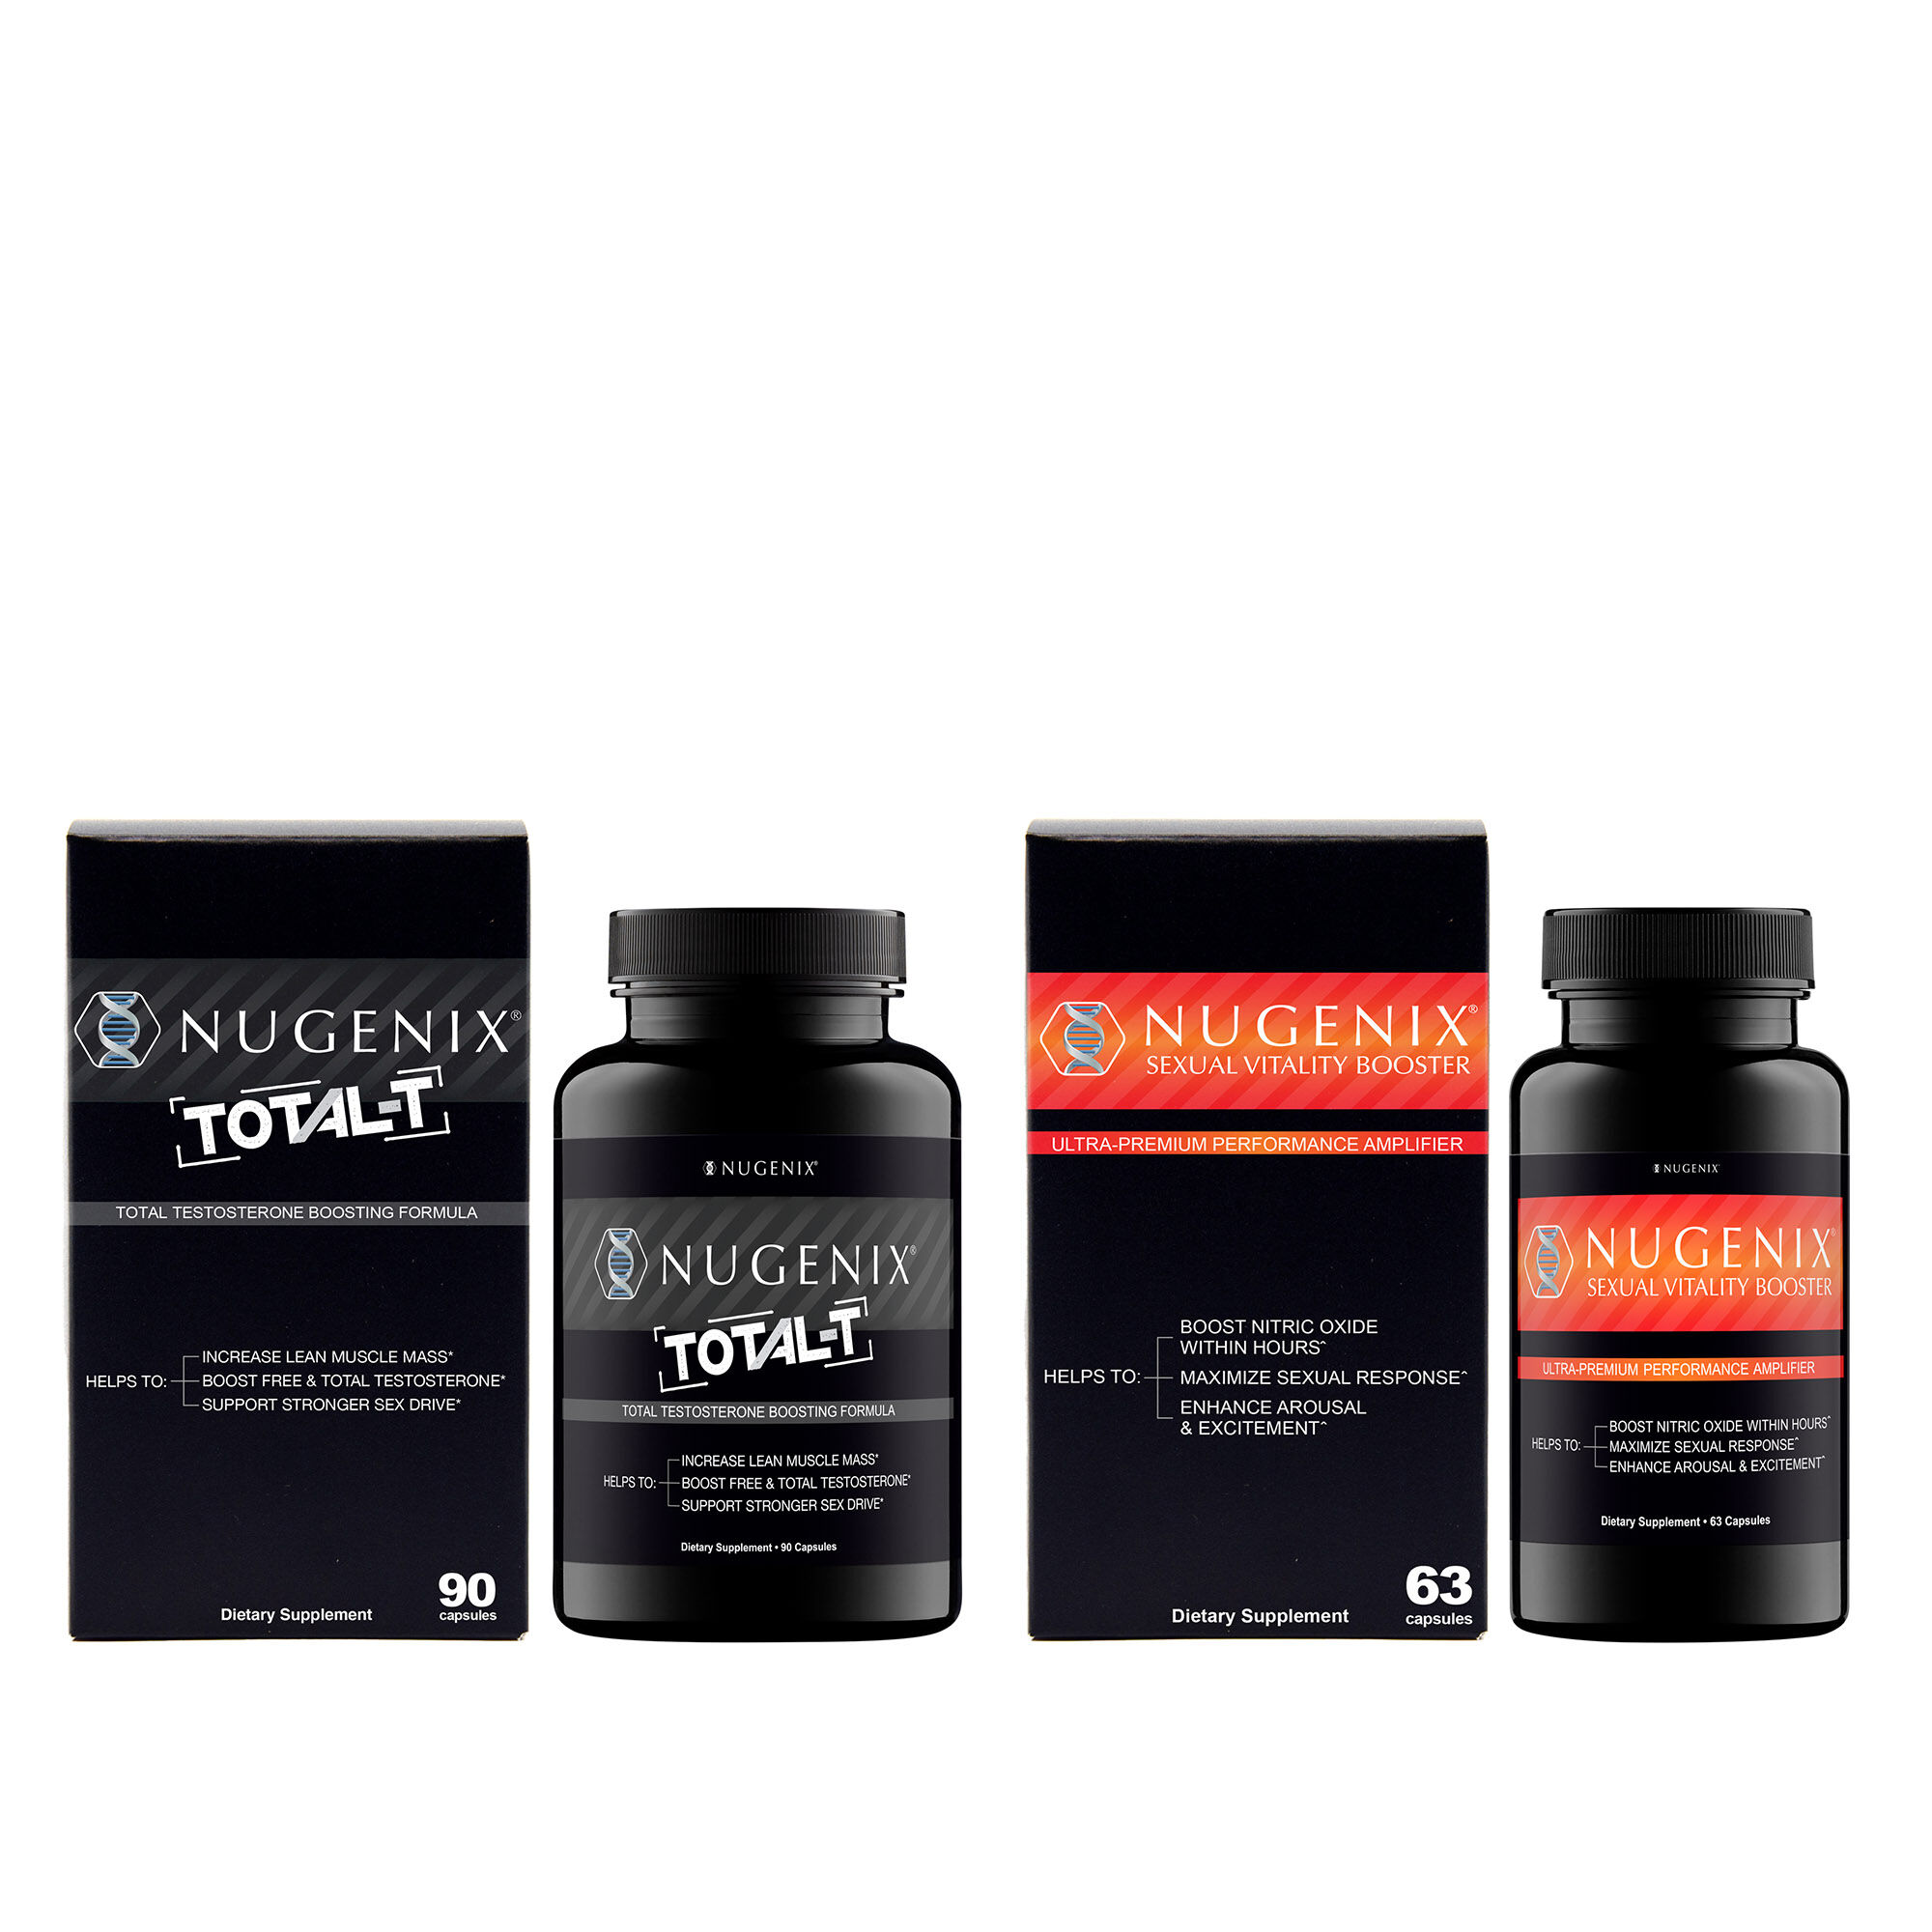 Total T Nugenix Sexual Vitality Booster Bundle image